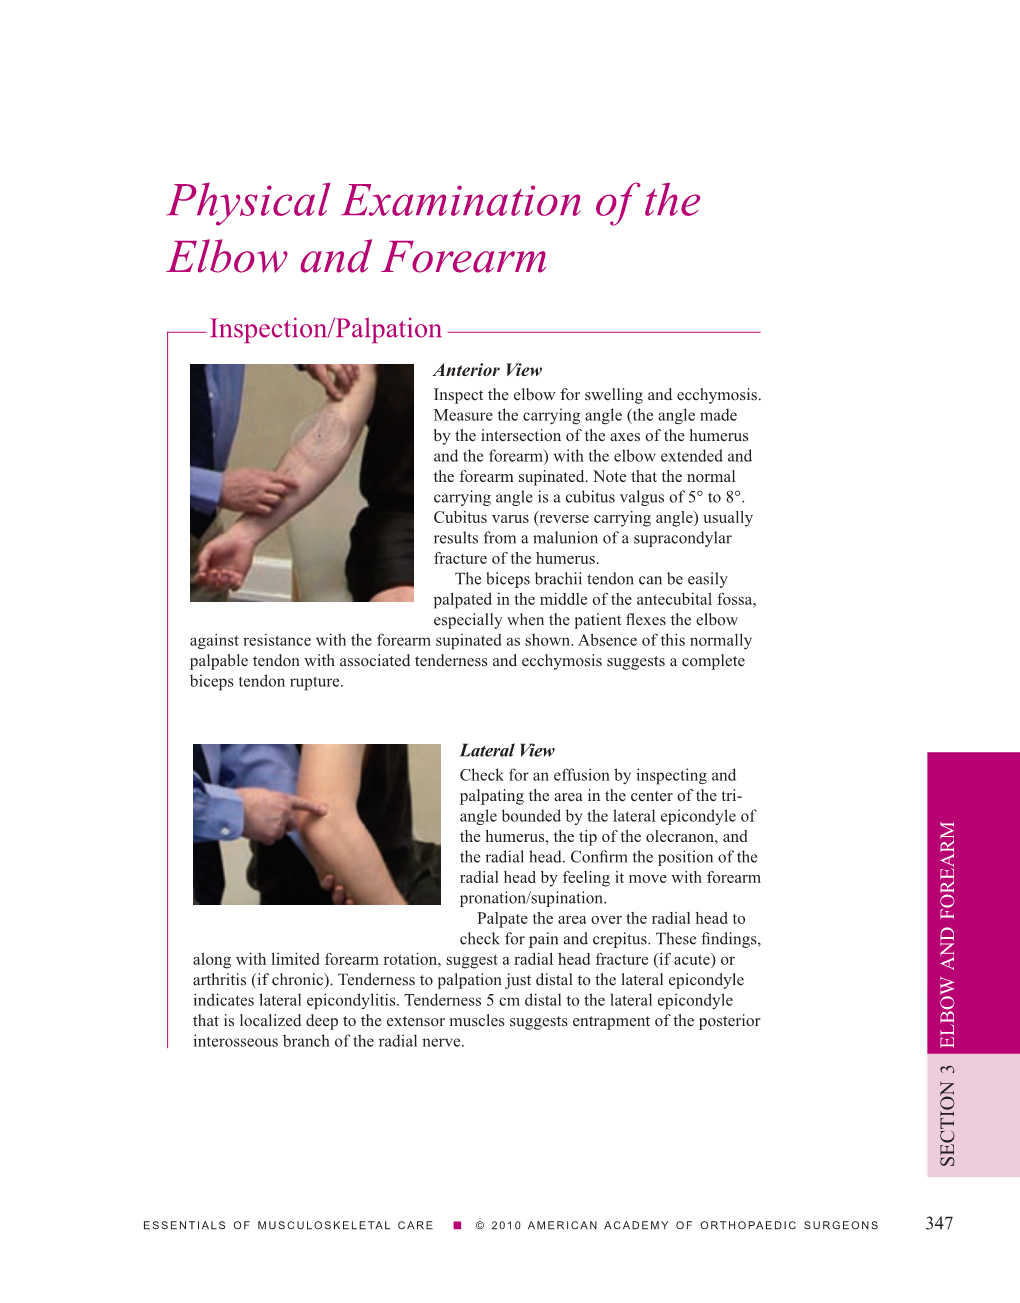 Physical Examination of the Elbow and Forearm